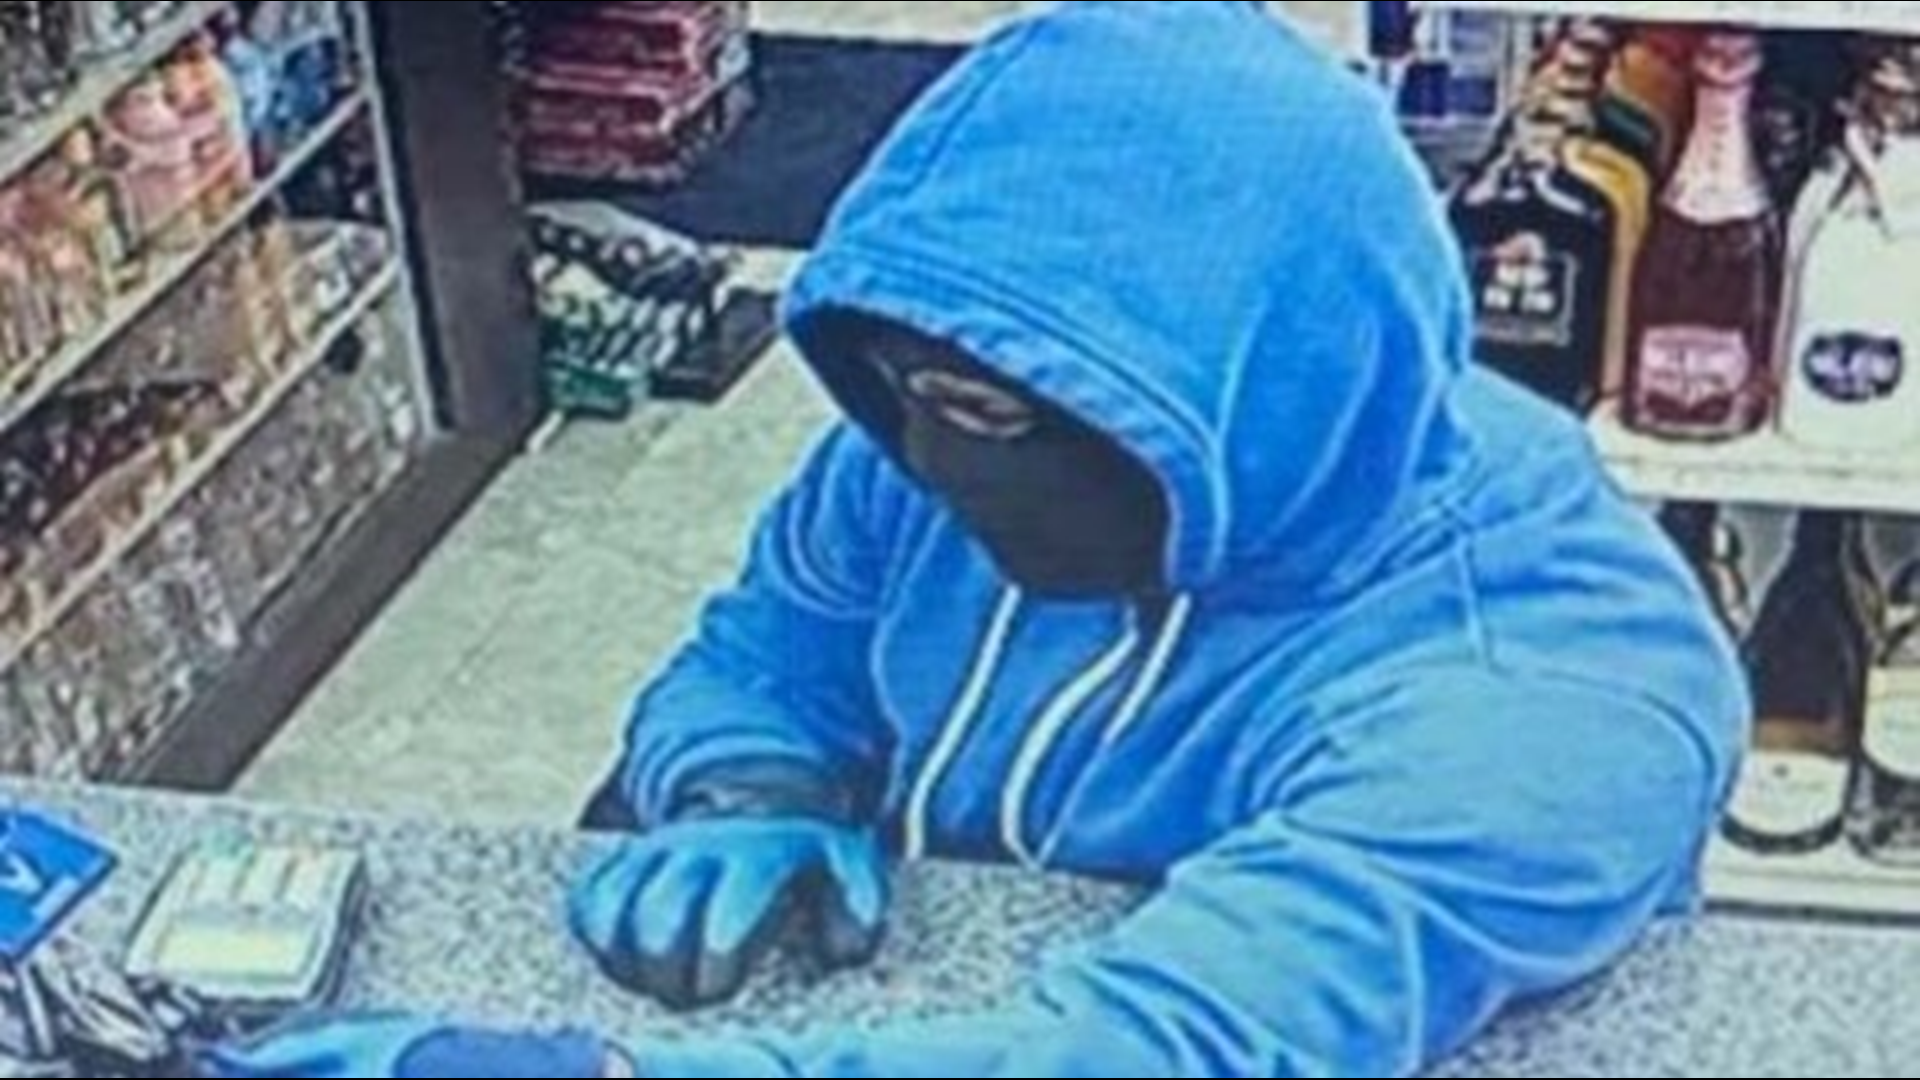 Authorities in Ottawa County are investigating two unarmed robberies. Investigators say a man in dark clothing with a mask over his face and gloves on walked into the store and demanded cash from the register. He left the store in an unknown direction.